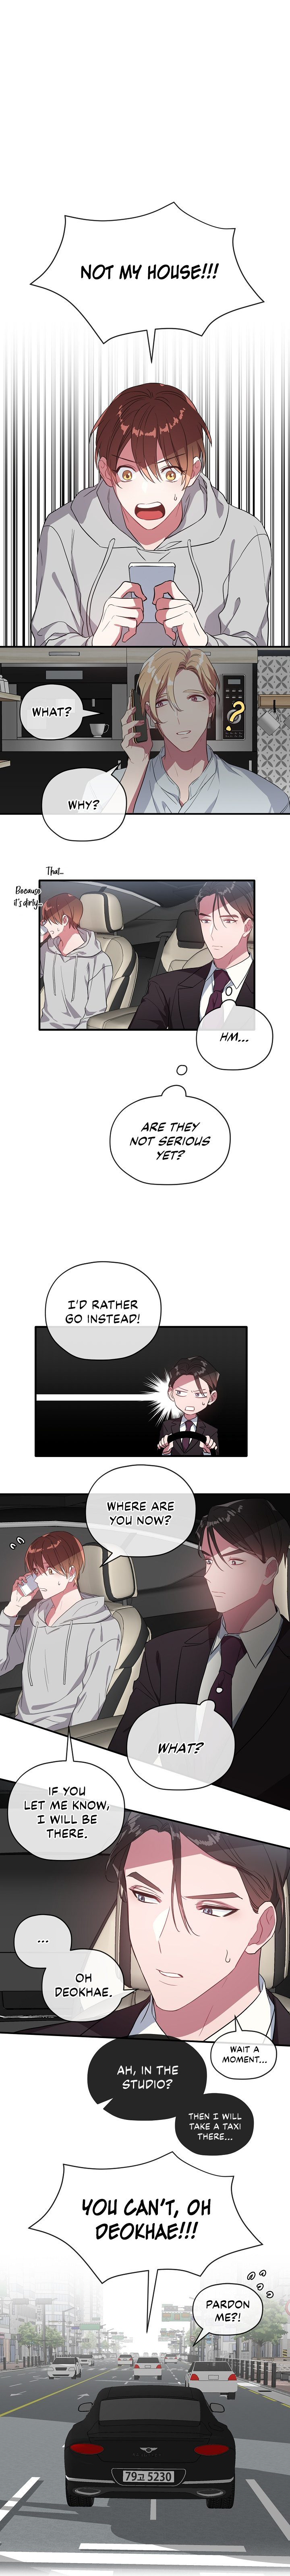 Chasing Mr. Ceo - Page 2